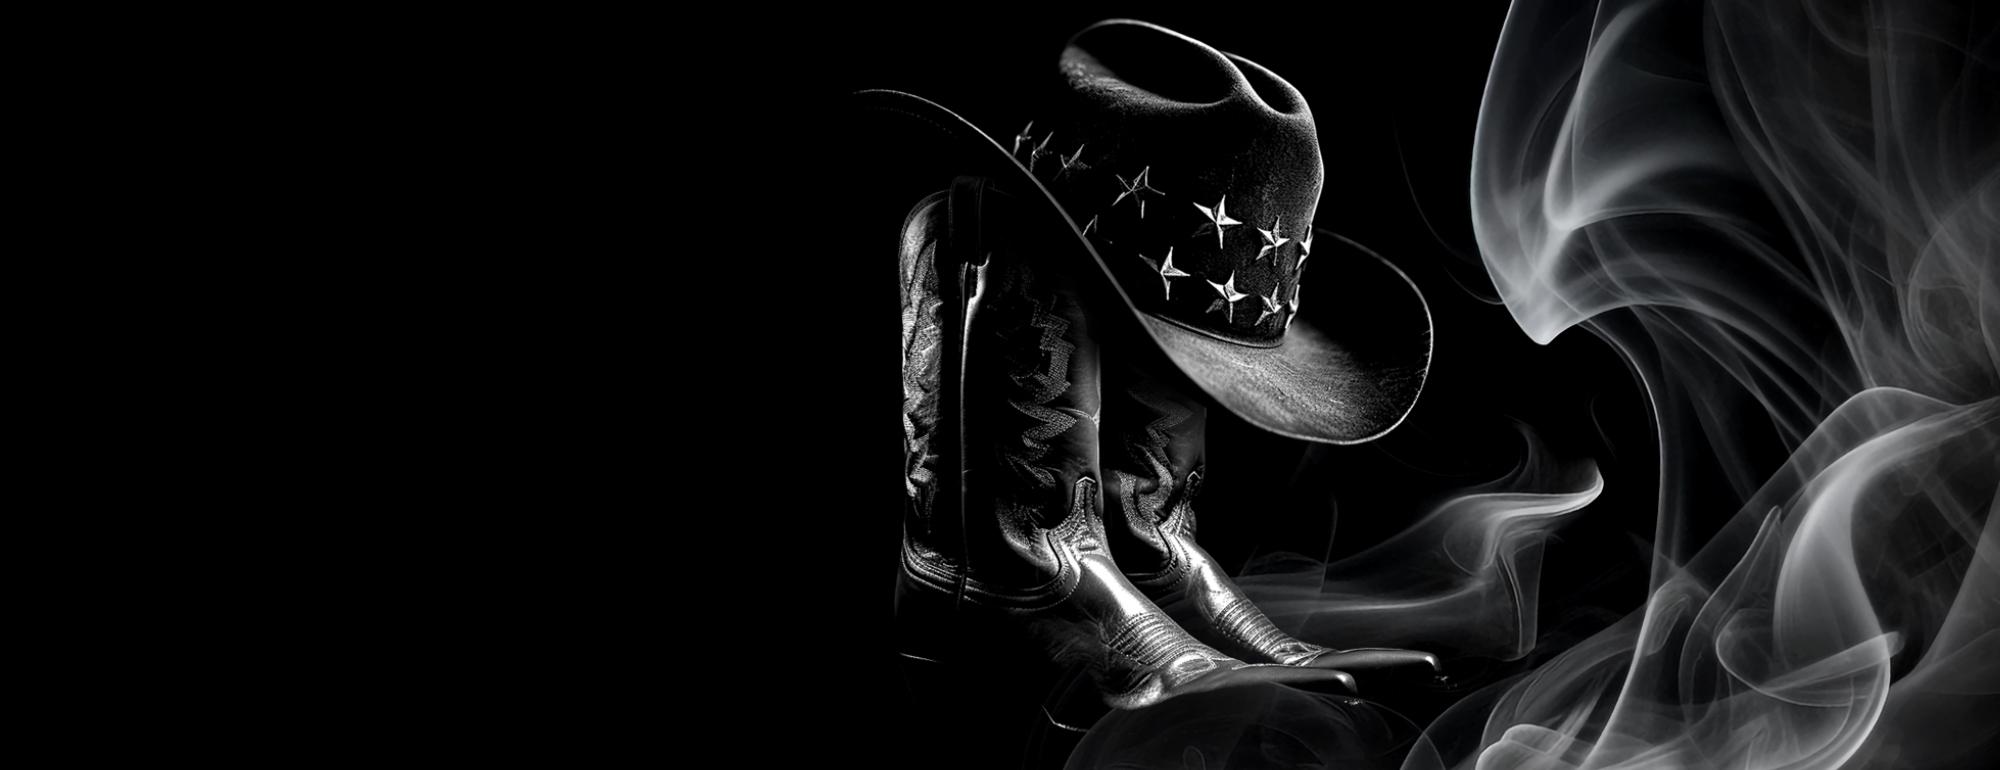 Image of black cowboy boots and hat with smoky atmosphere